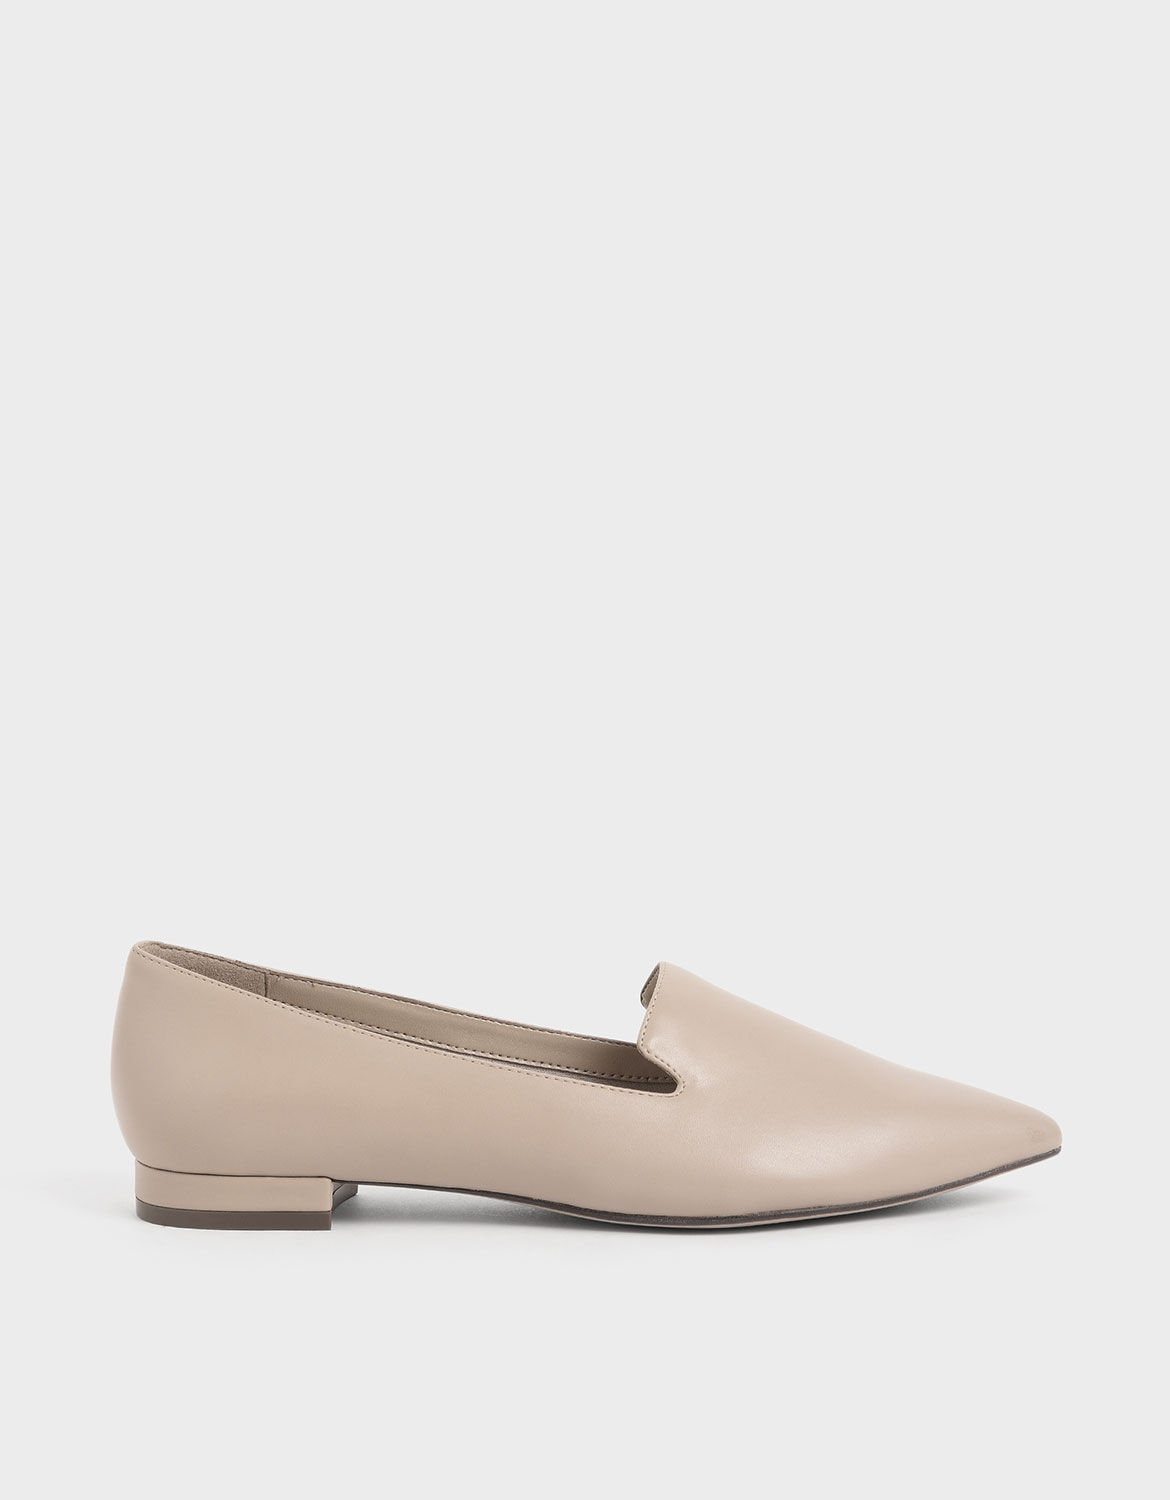 leather pointed toe loafers